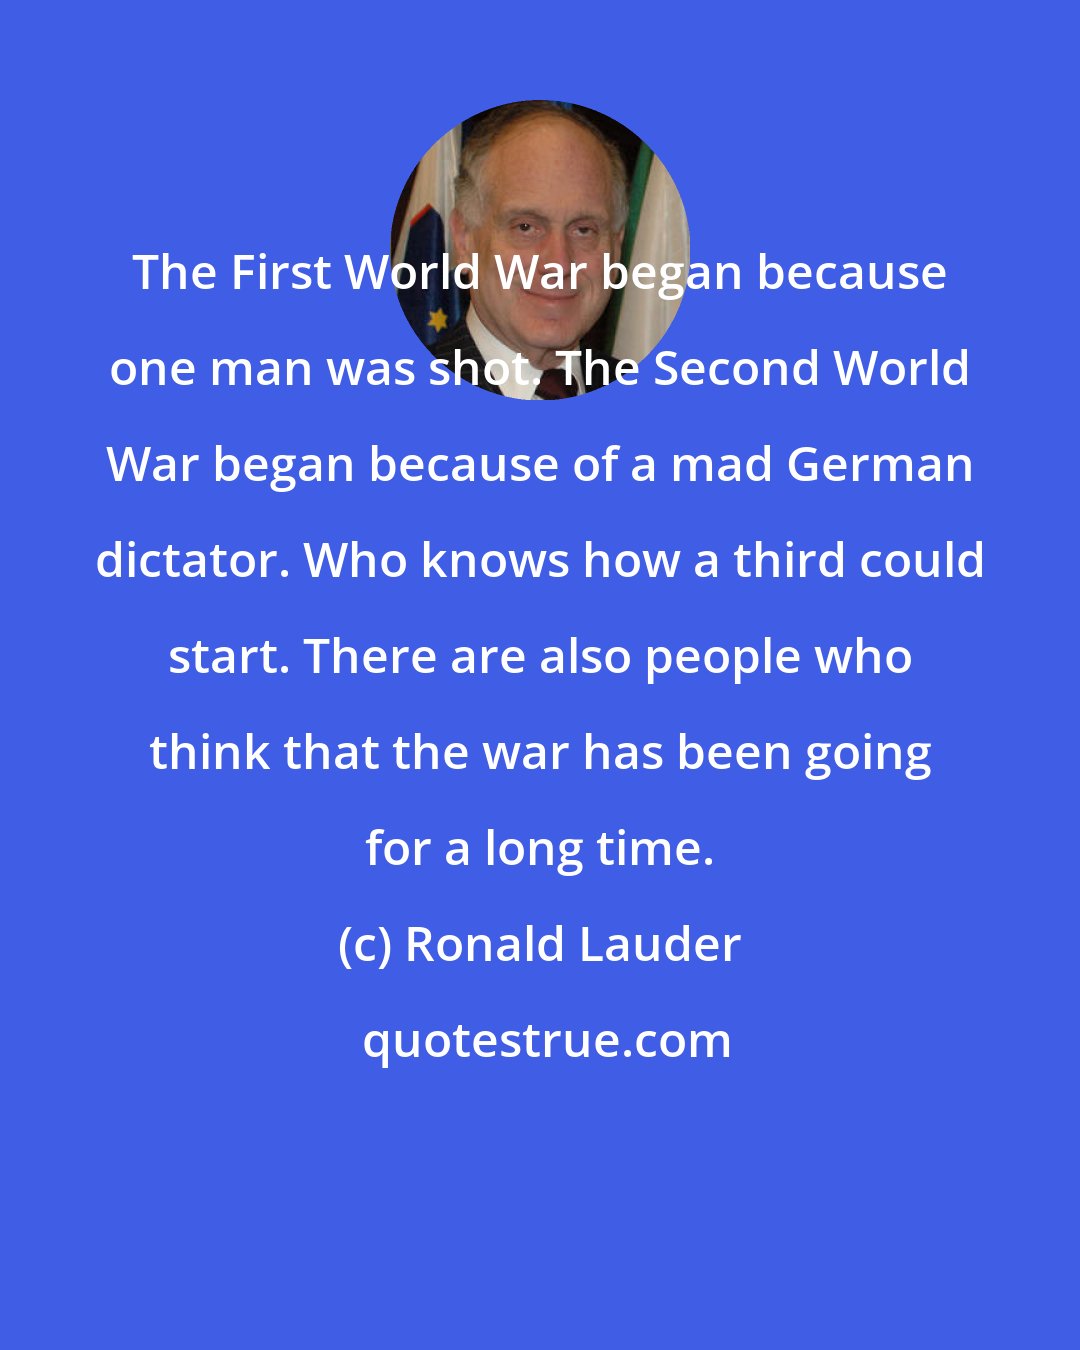 Ronald Lauder: The First World War began because one man was shot. The Second World War began because of a mad German dictator. Who knows how a third could start. There are also people who think that the war has been going for a long time.